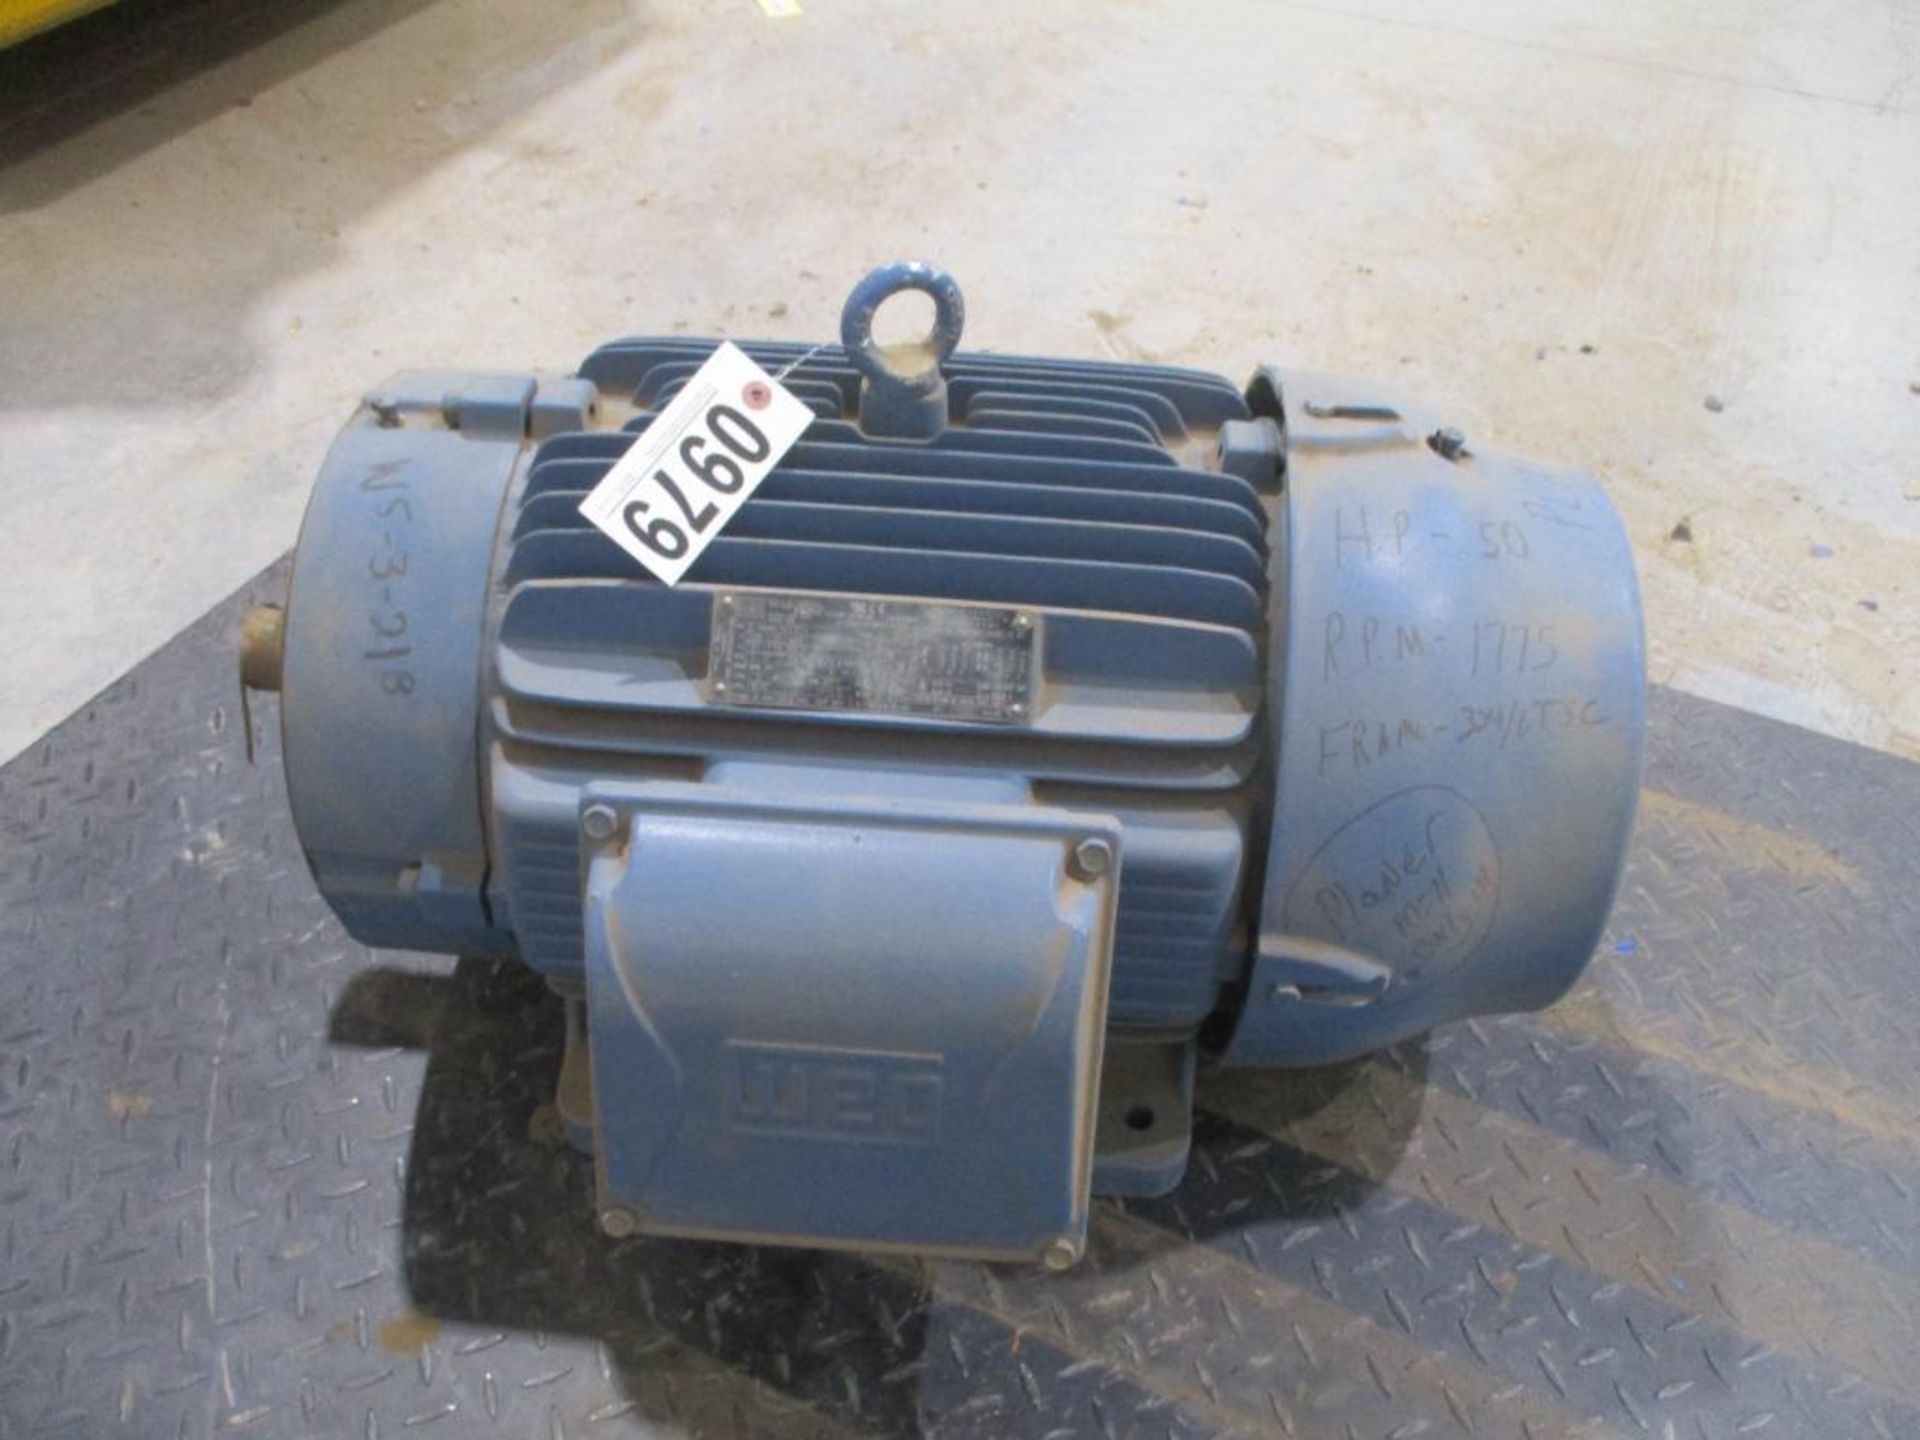 WEG 3 PAHSE 50HP 1775RPM 324/6TSC FRAME A/C MOTOR P/N 05018ET3E326TSC-W22, 594# lbs (There will be a